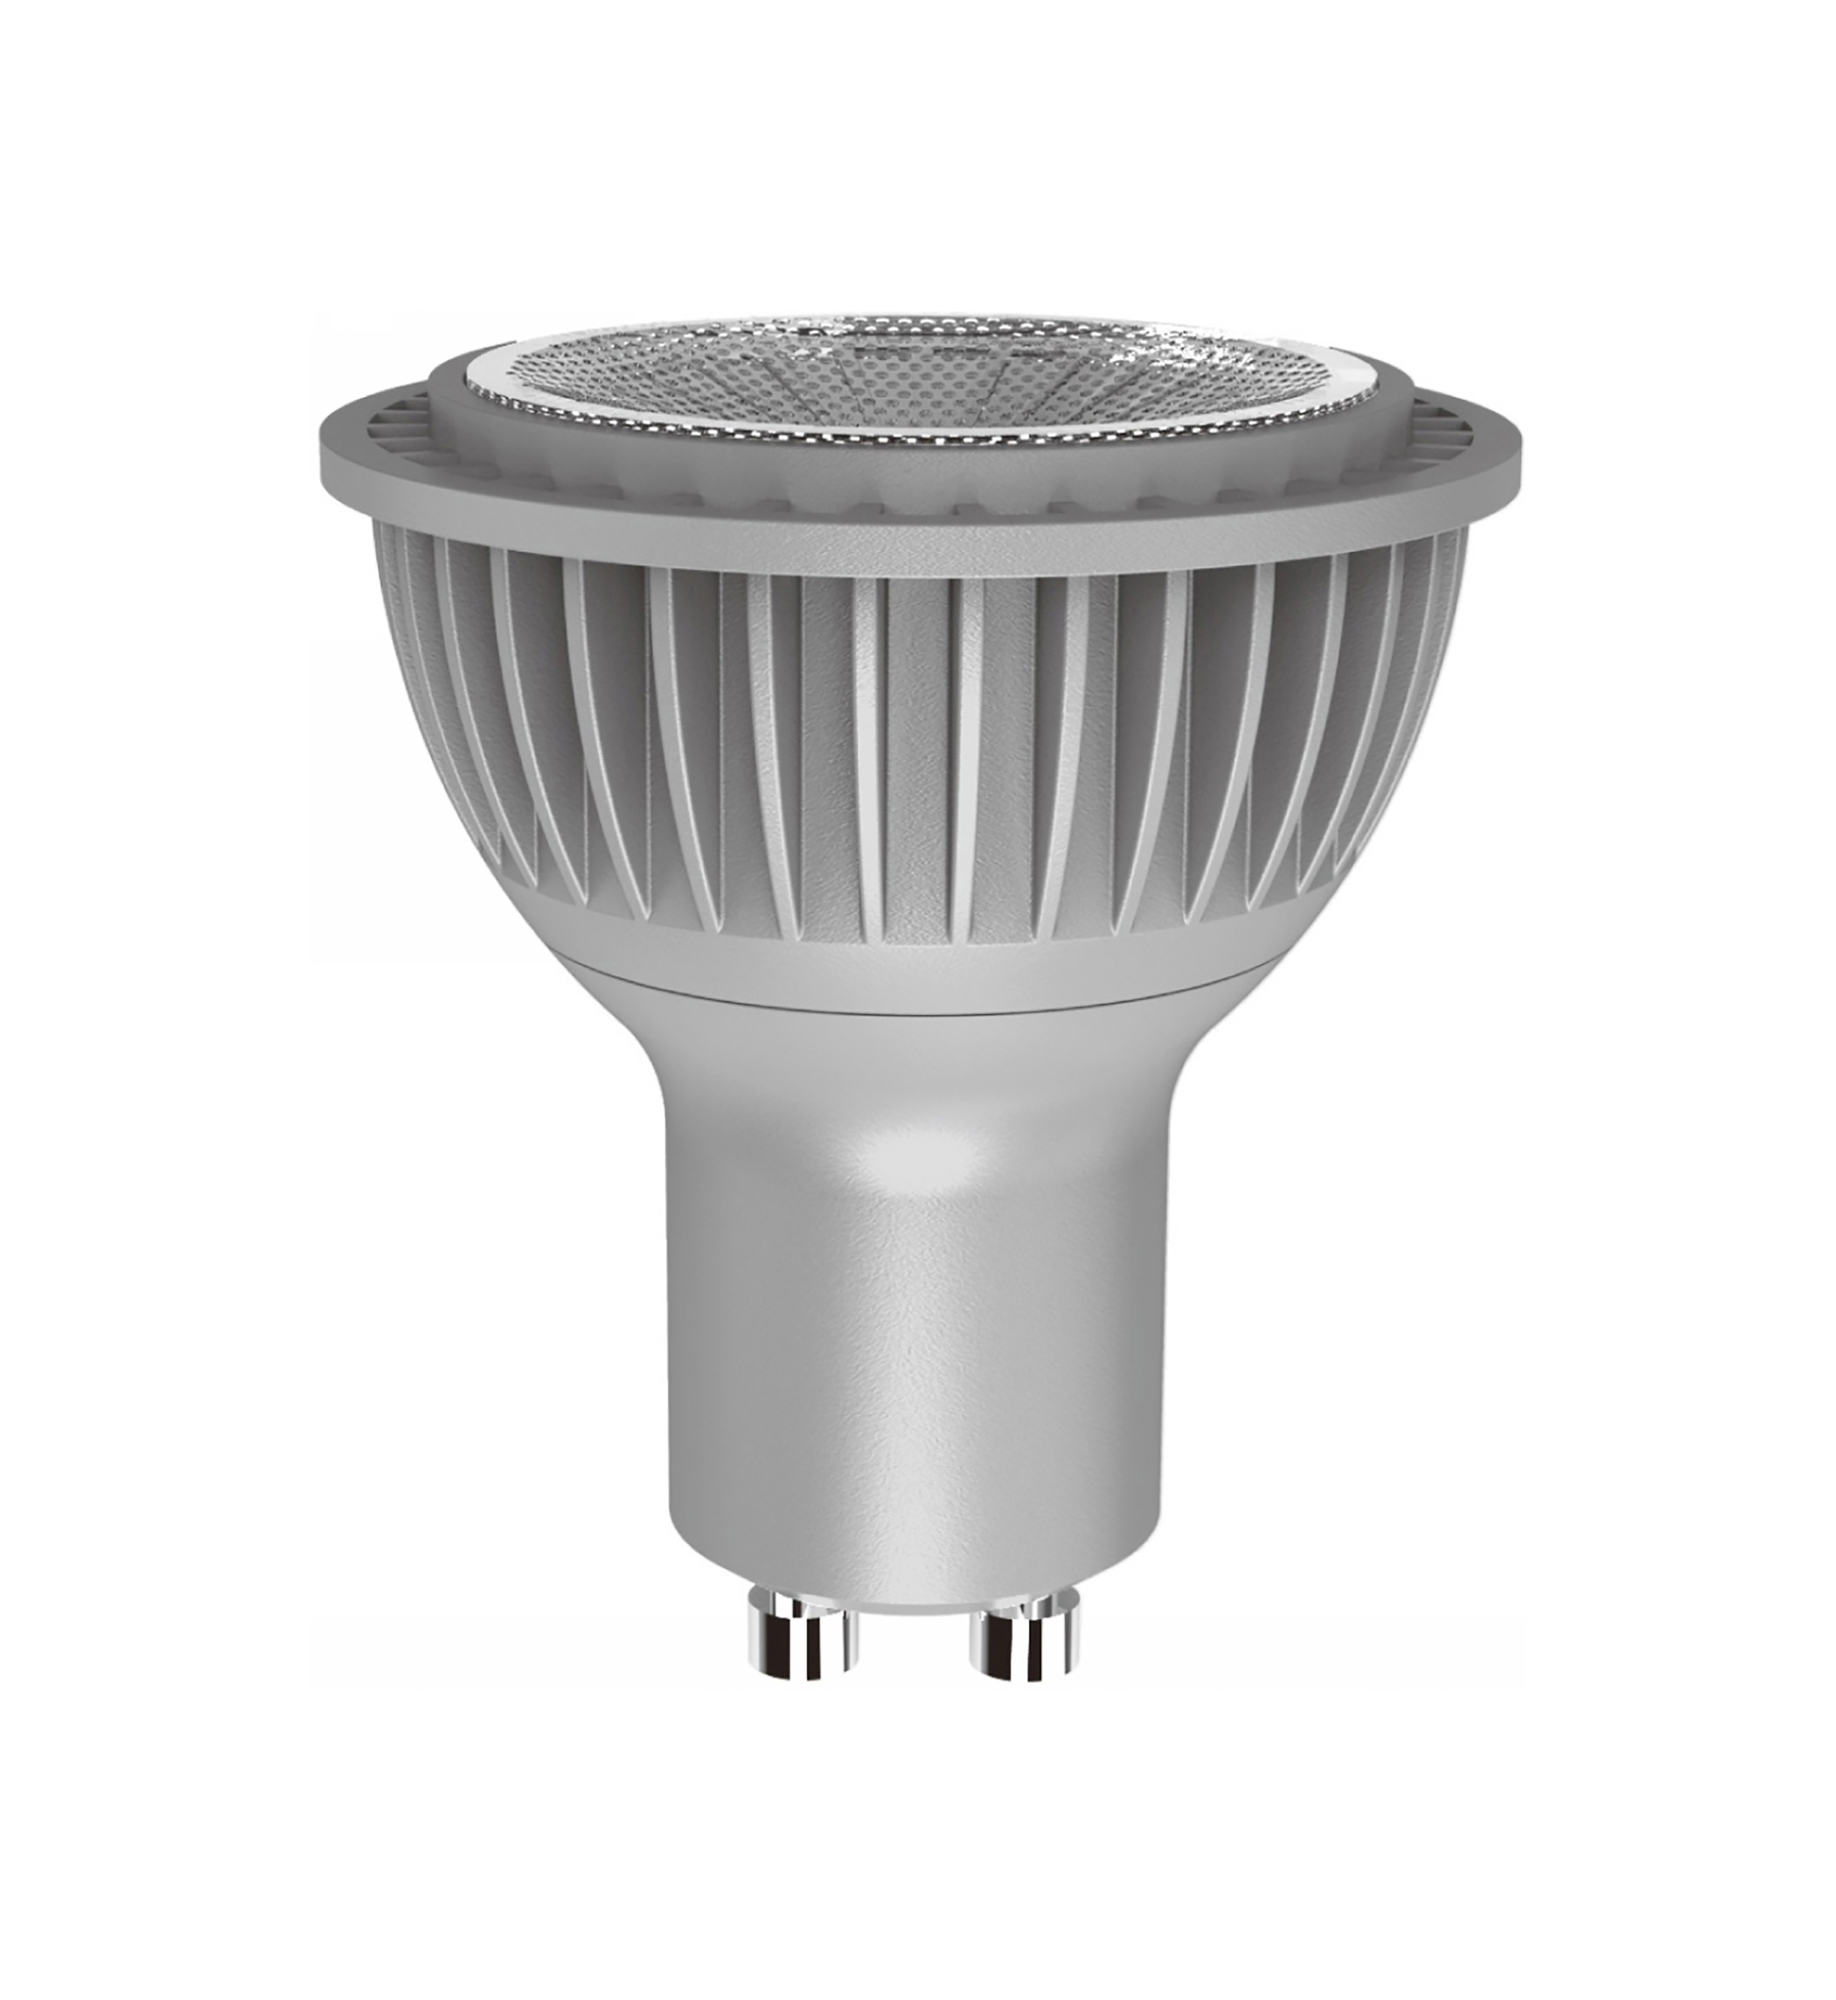 746200032  Truevision LED GU10 Dimmable 7W 4000K 450lm